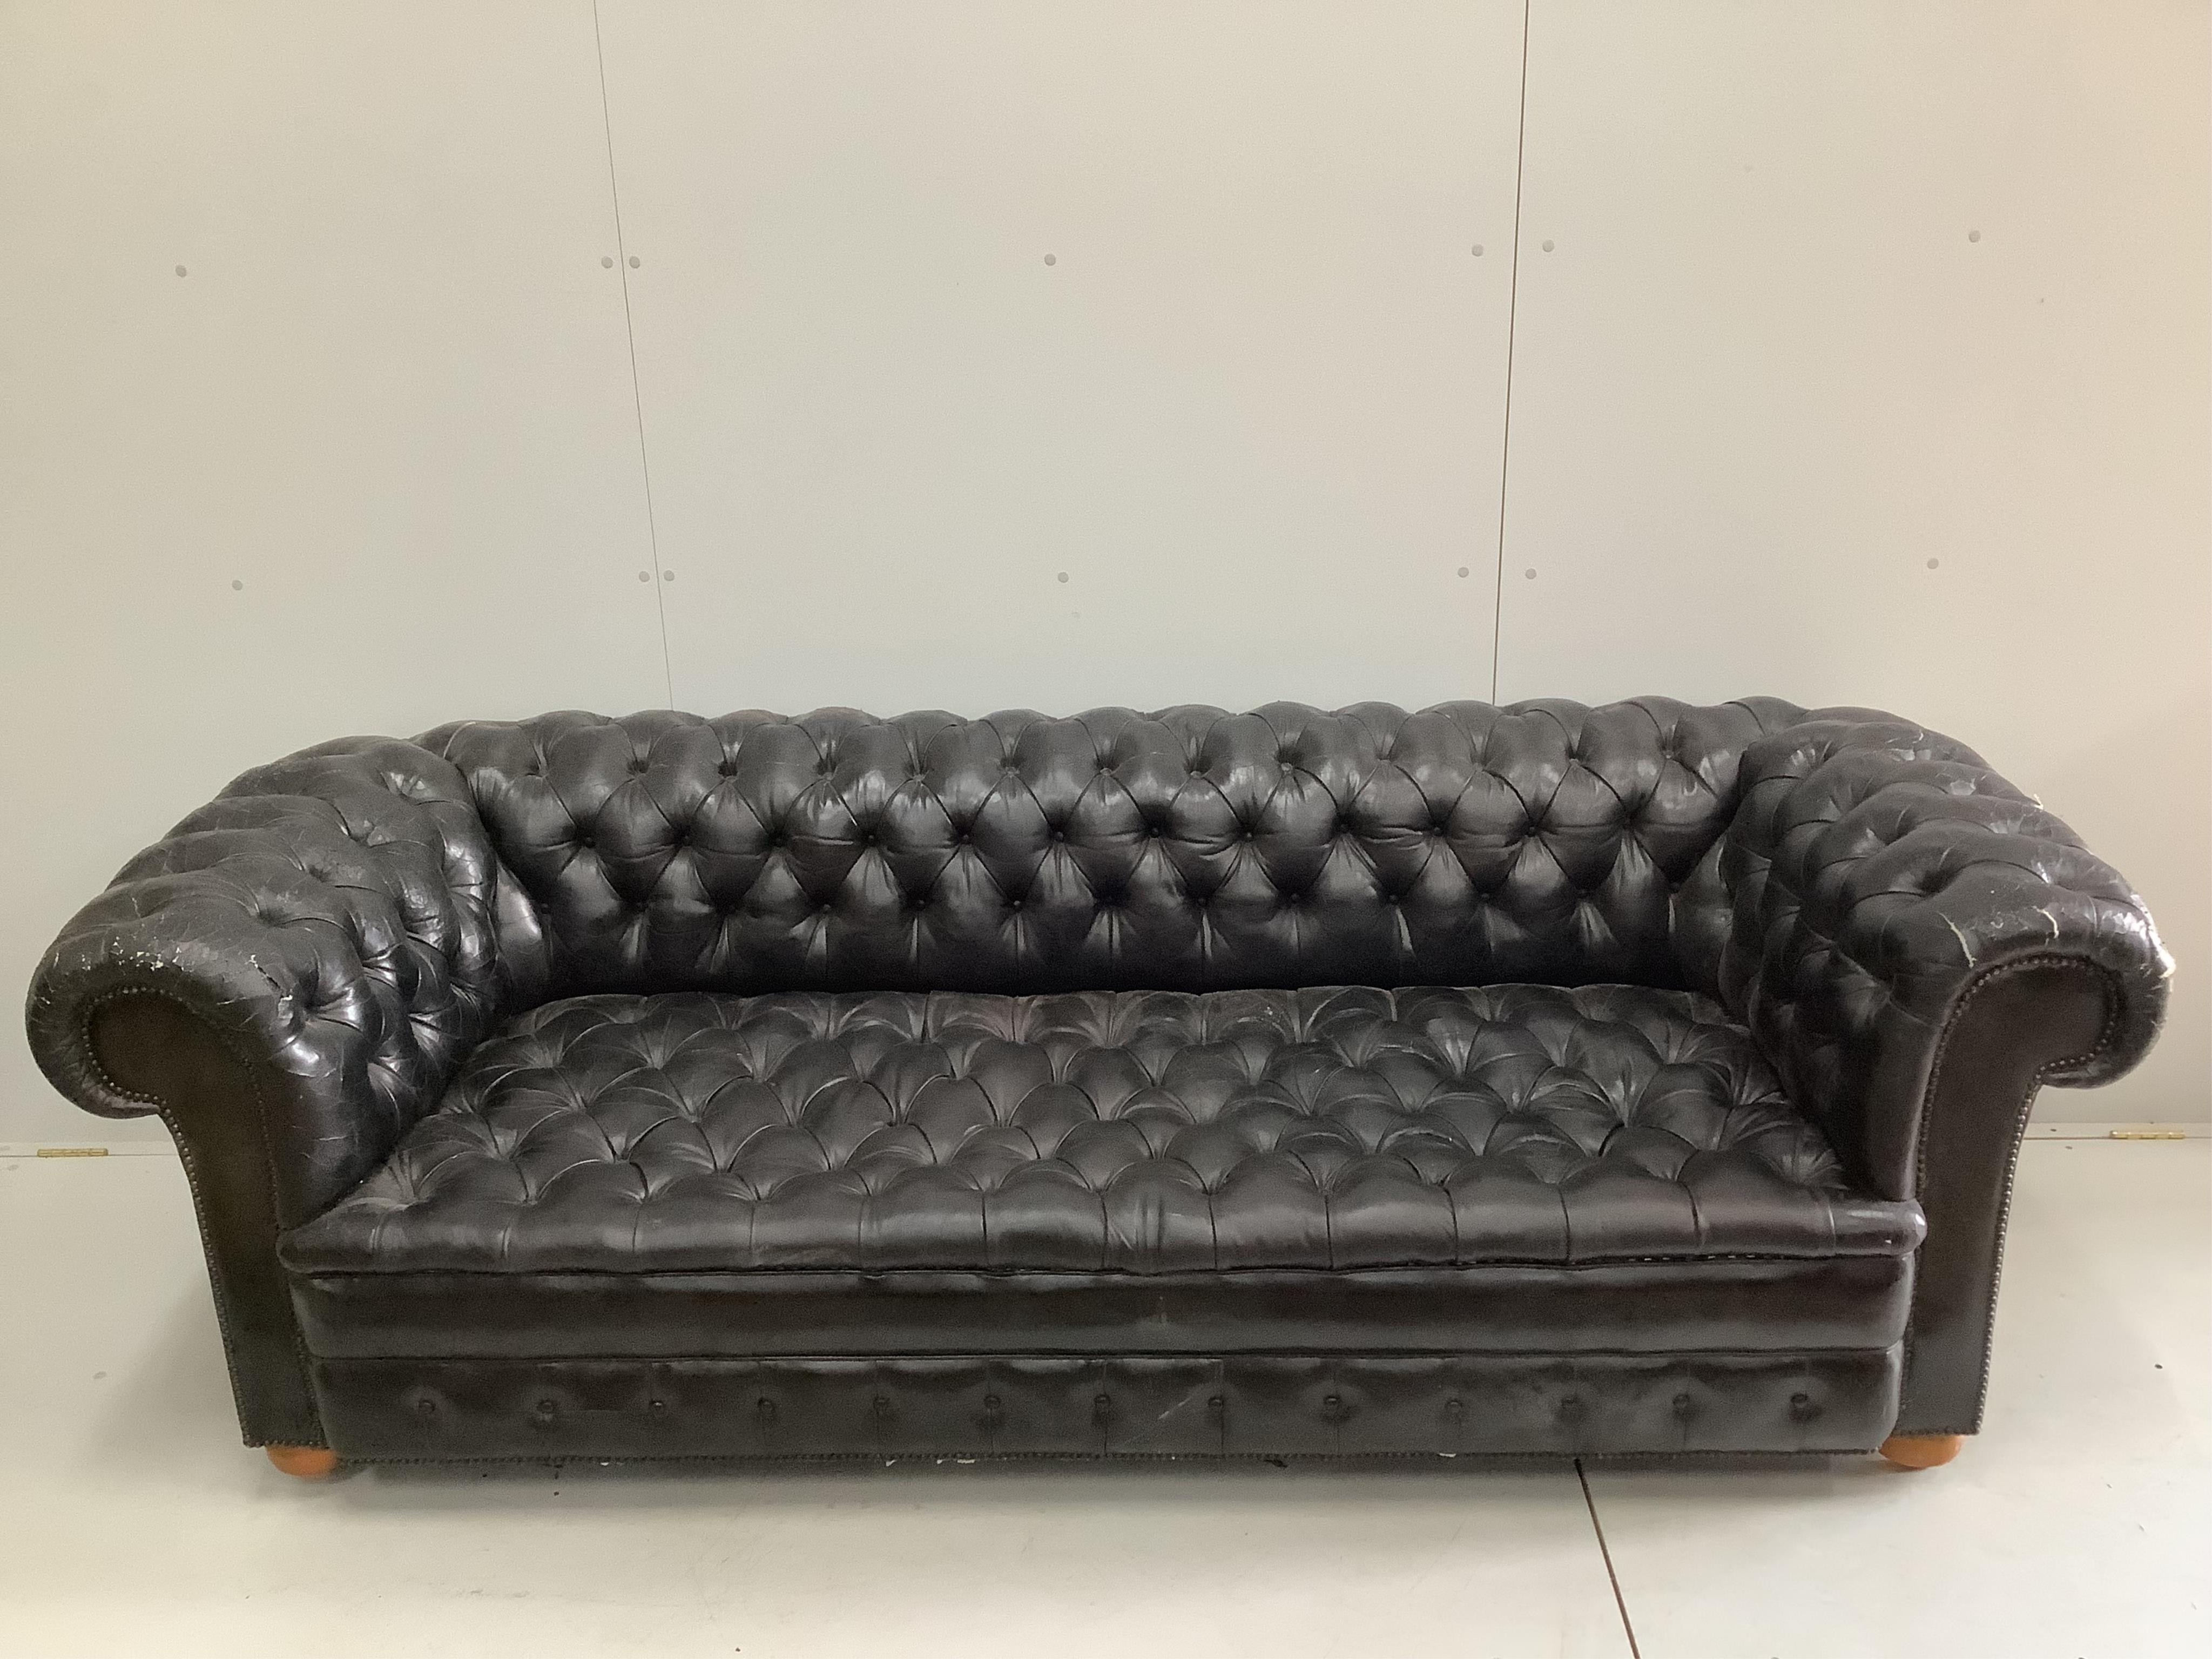 A Victorian style black leather button back chesterfield settee, width 230cm, depth 90cm, height 73cm. Condition - poor